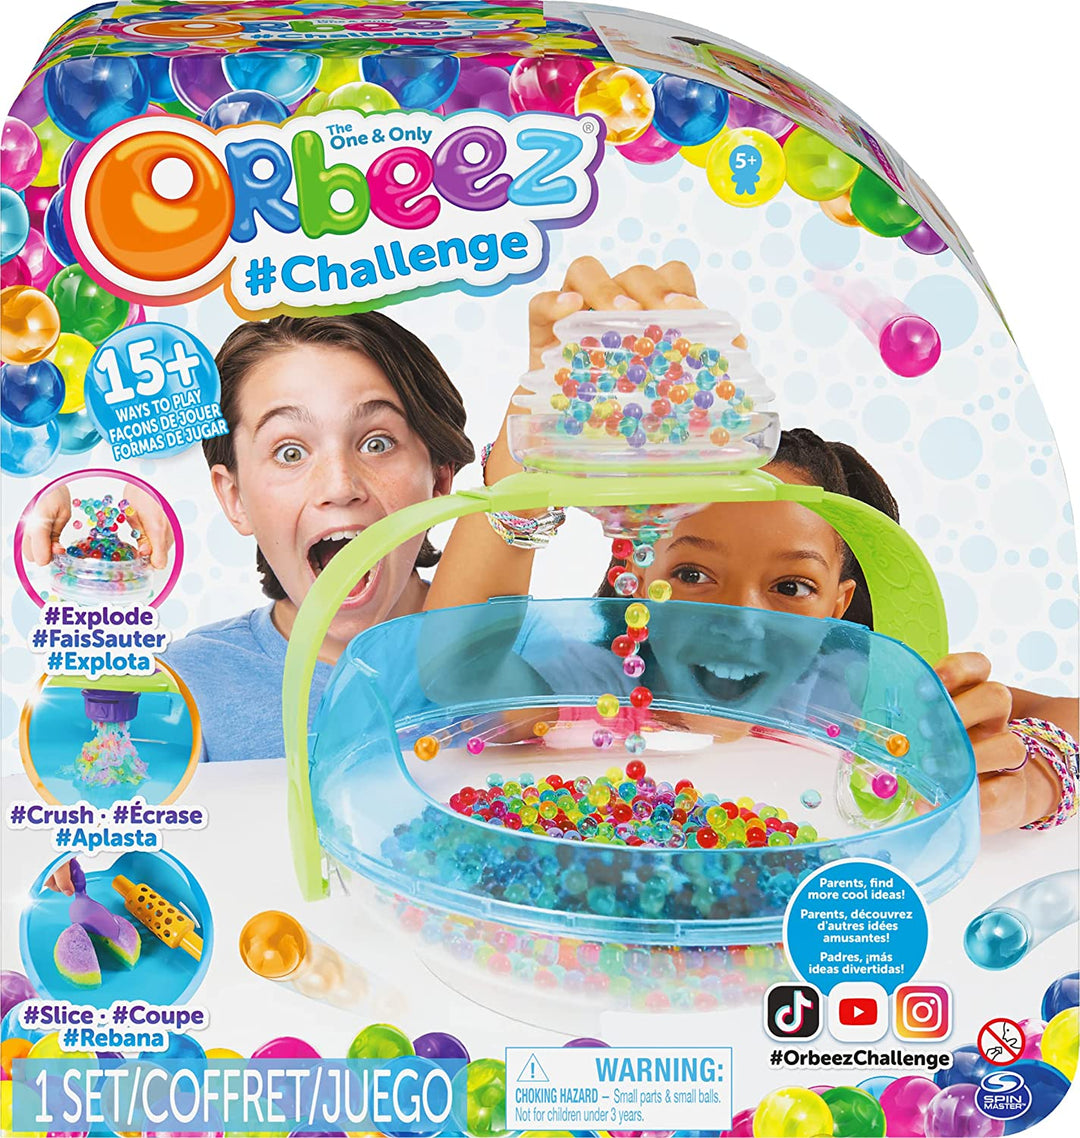 Orbeez Challenge, The One and Only, 2000 perles d&#39;eau non toxiques, comprend 6 outils